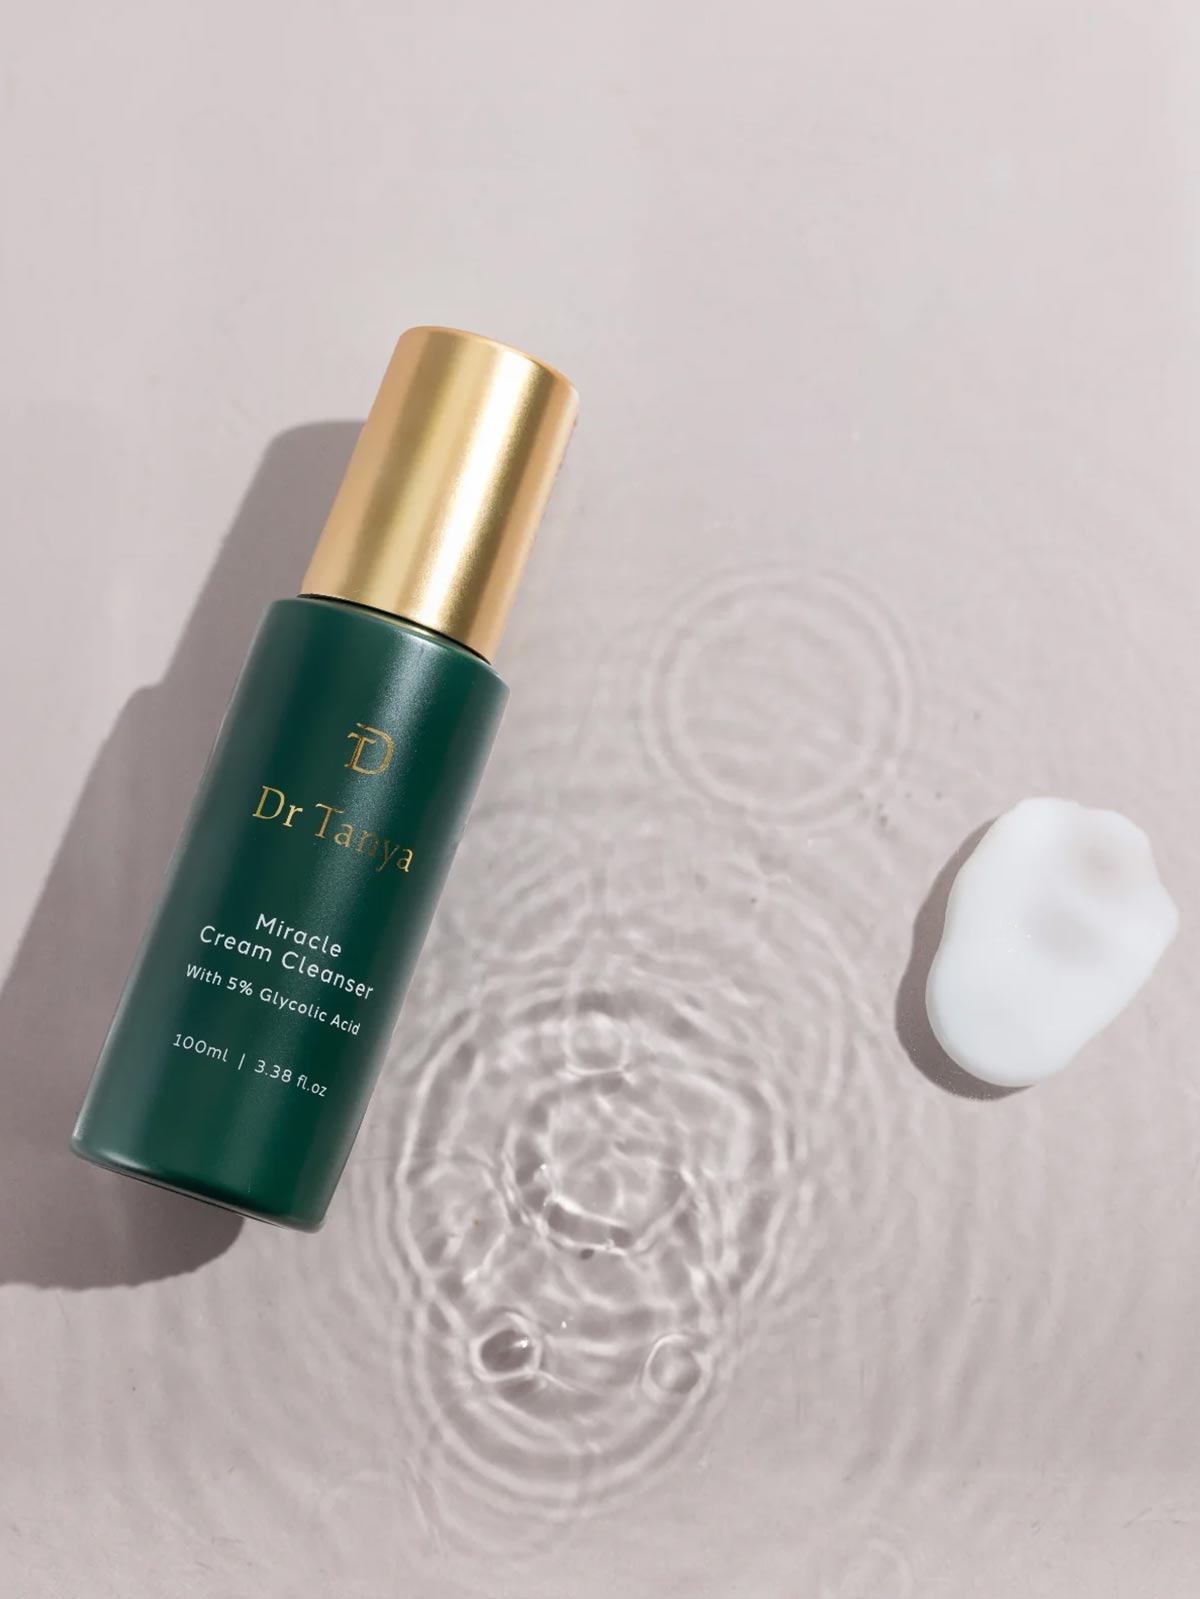 Dr. Tanya - Everyday Miracle Cream Cleanser with Niacinamide & Glycolic Acid